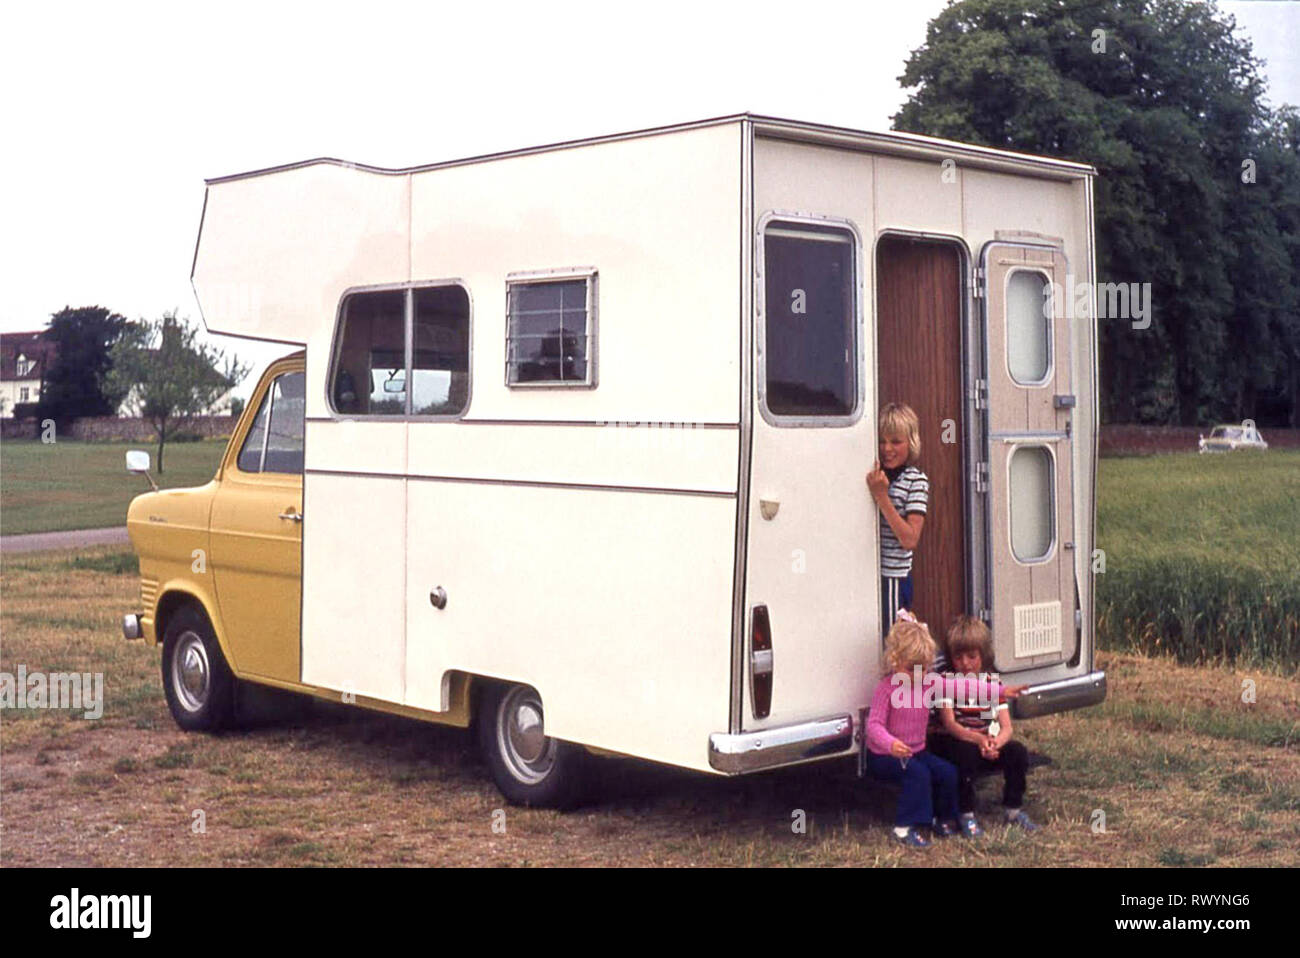 Purpose made RV camper van motorhome built 1970s on yellow Ford Transit chassis 3 young chidden 70s family holiday trip around East Anglia England UK two boys and one girl Stock Photo